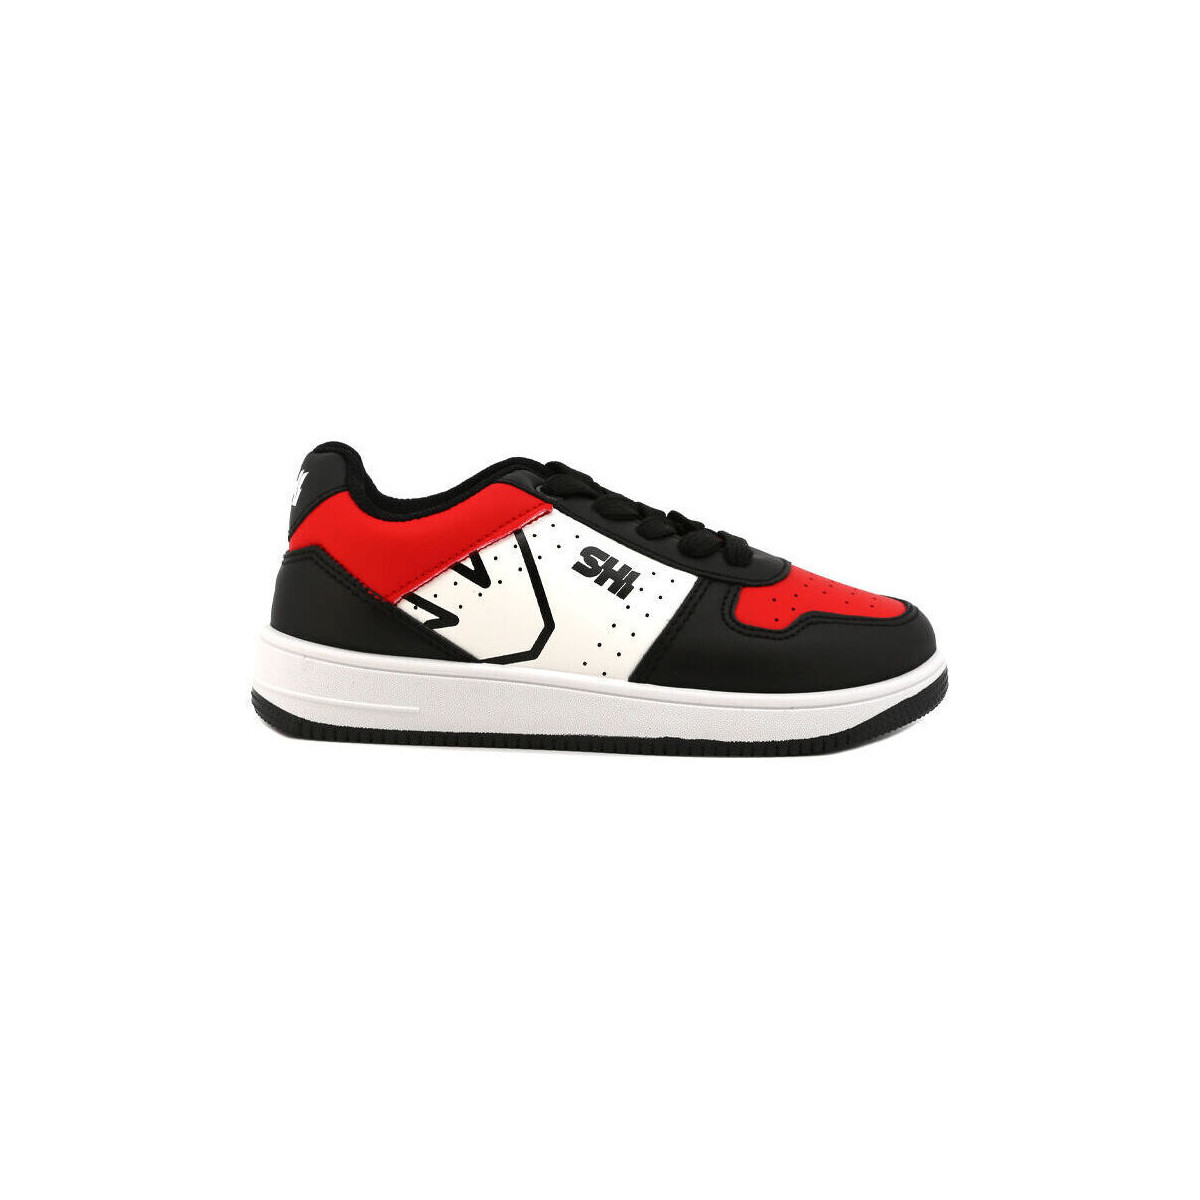 Chaussures Homme Baskets mode Shone 002-001 Black/Red Noir